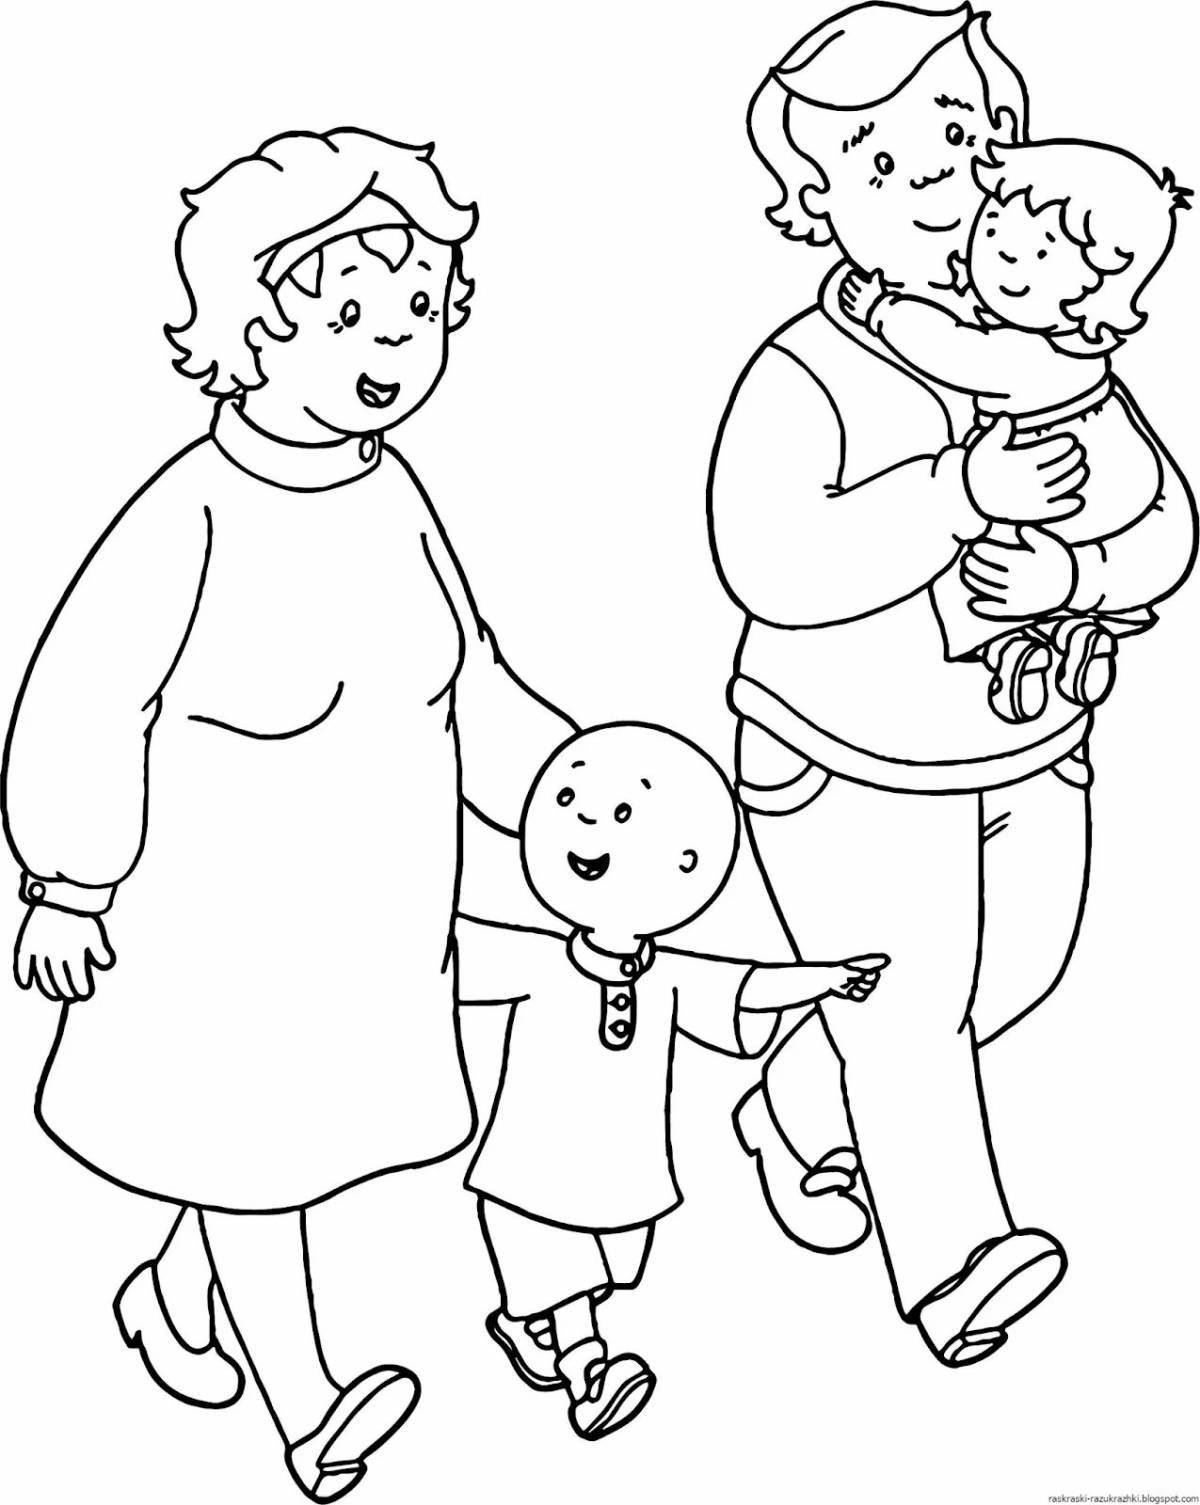 Humorous family coloring book for children 7 years old